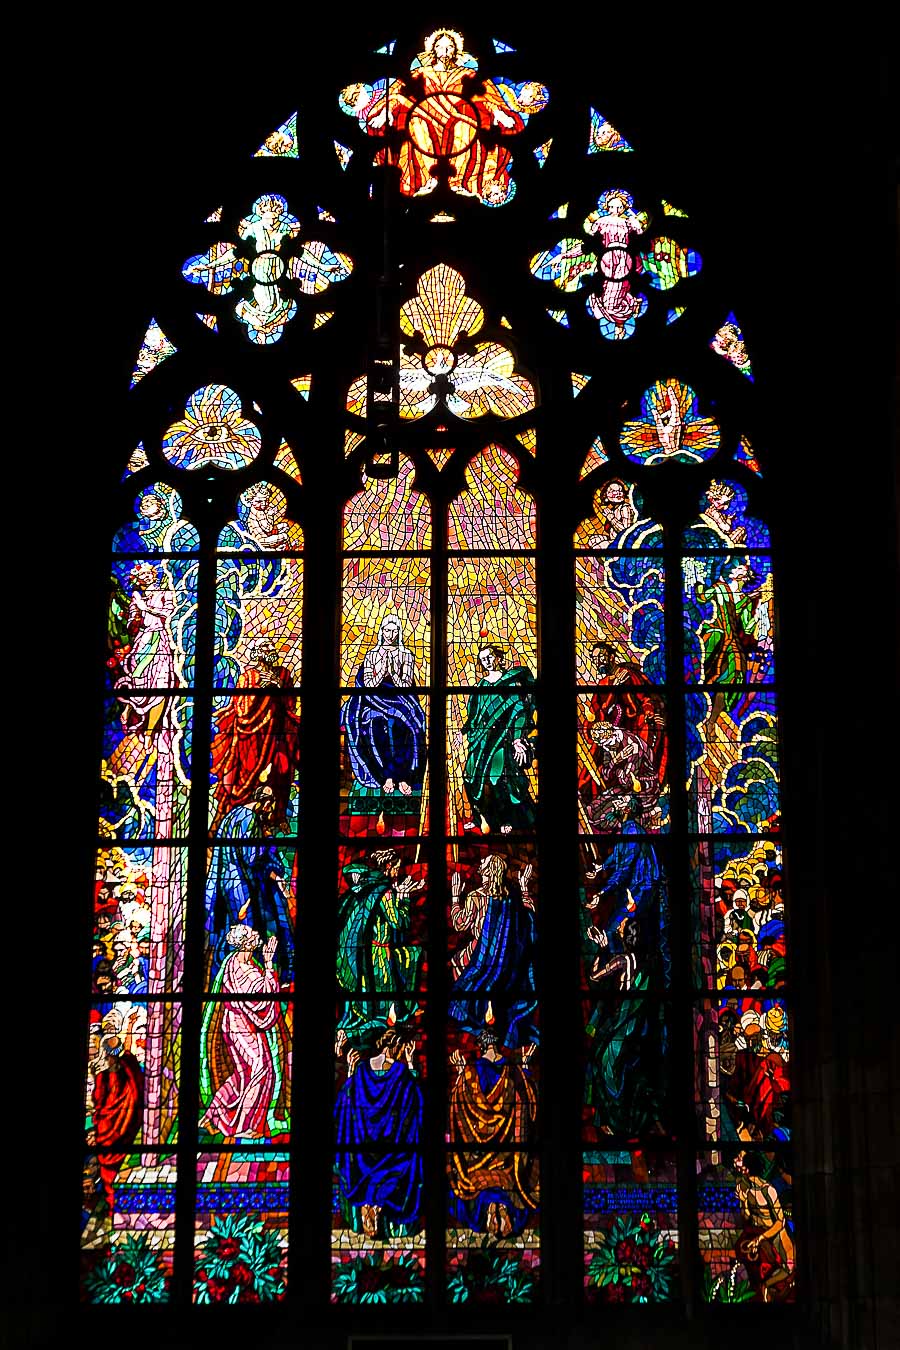 Prague Architecture Photos - St. Vitus Cathedral Stained Glass Windows